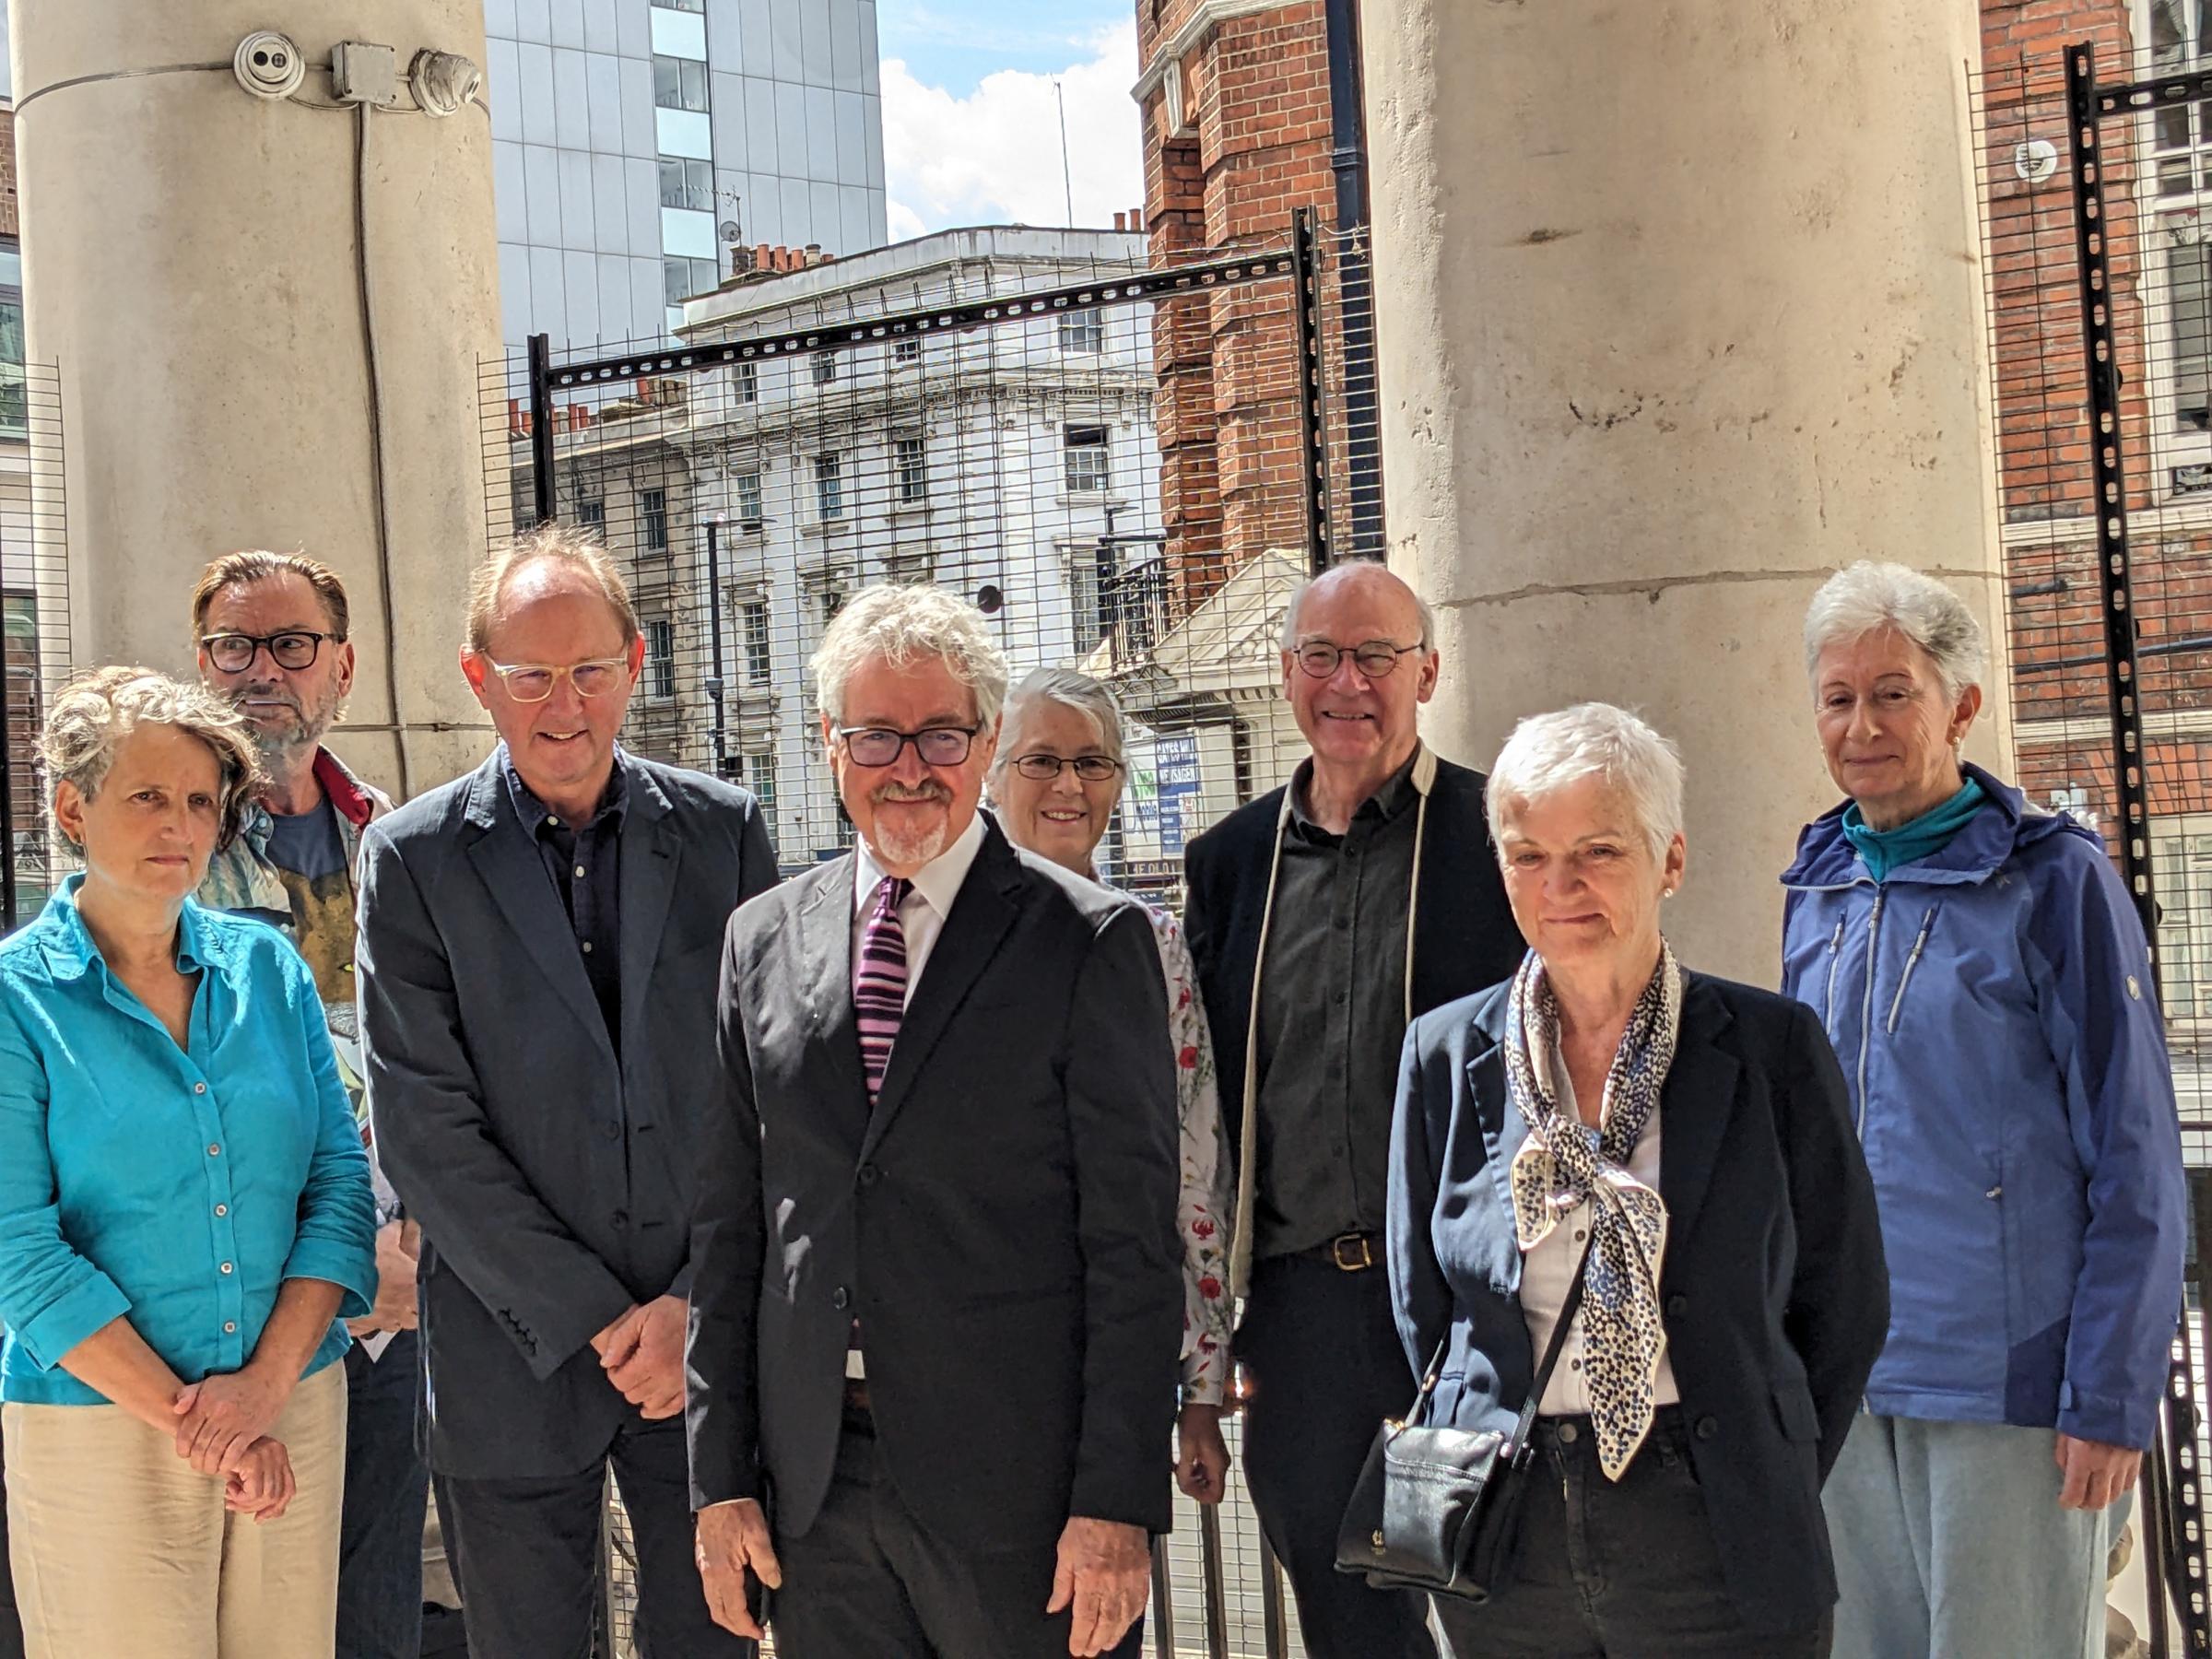 Griff Rhys Jones with Save Museum Street Coalition at St Georges Bloomsbury with view of tower block which could be demolished behind them. Photo: Julia Gregory